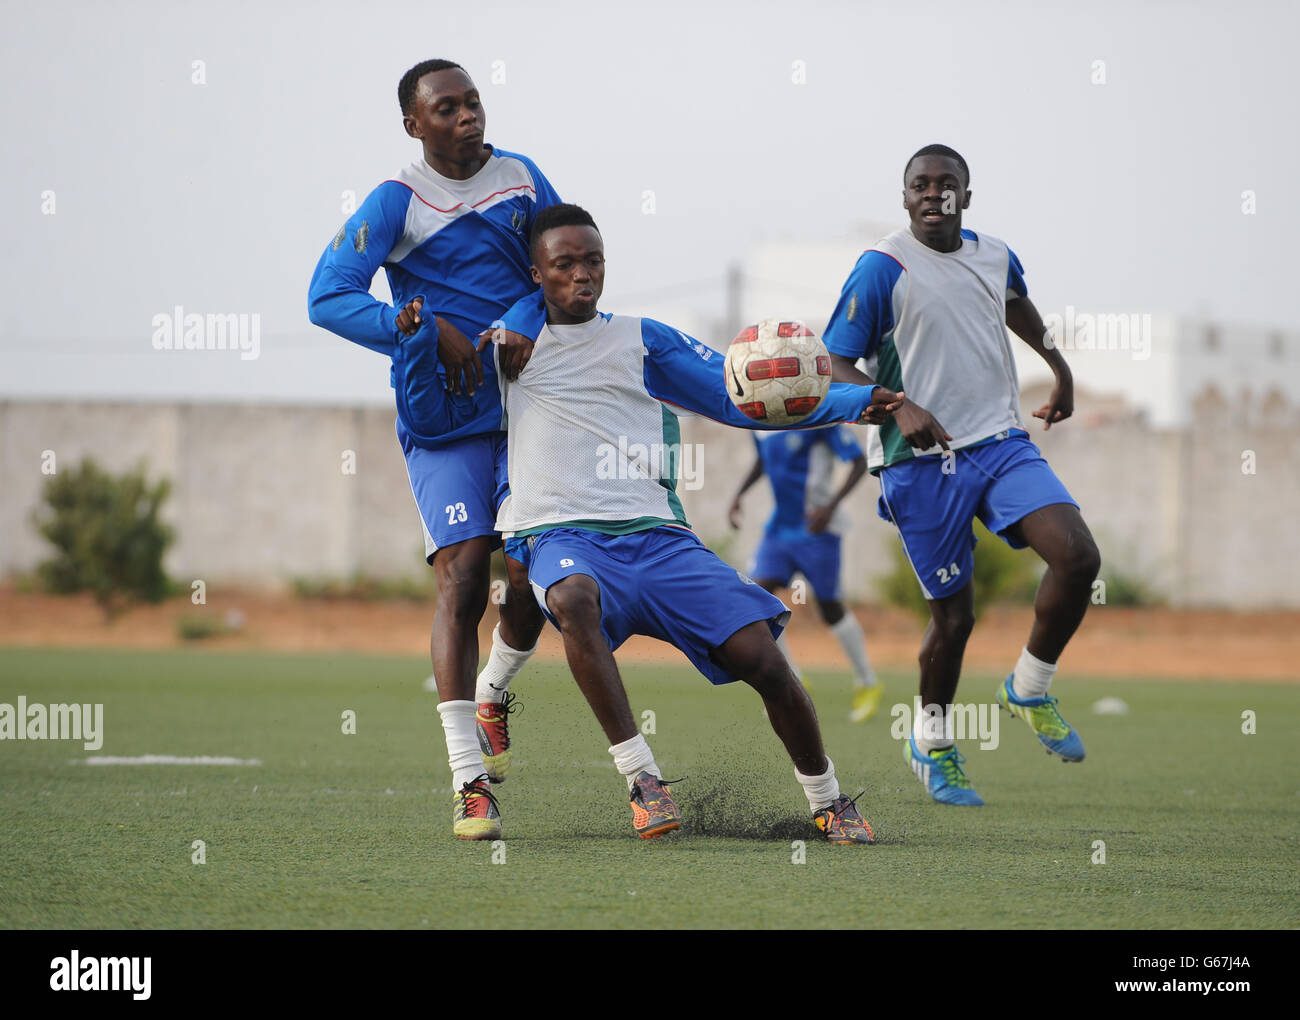 Members of the Aspire Academy play a training match at their base. PRESS ASSOCIATION Photo. Picture date: Wednesday June 26, 2013. Photo credit should read: Joe Giddens/PA Wire Stock Photo